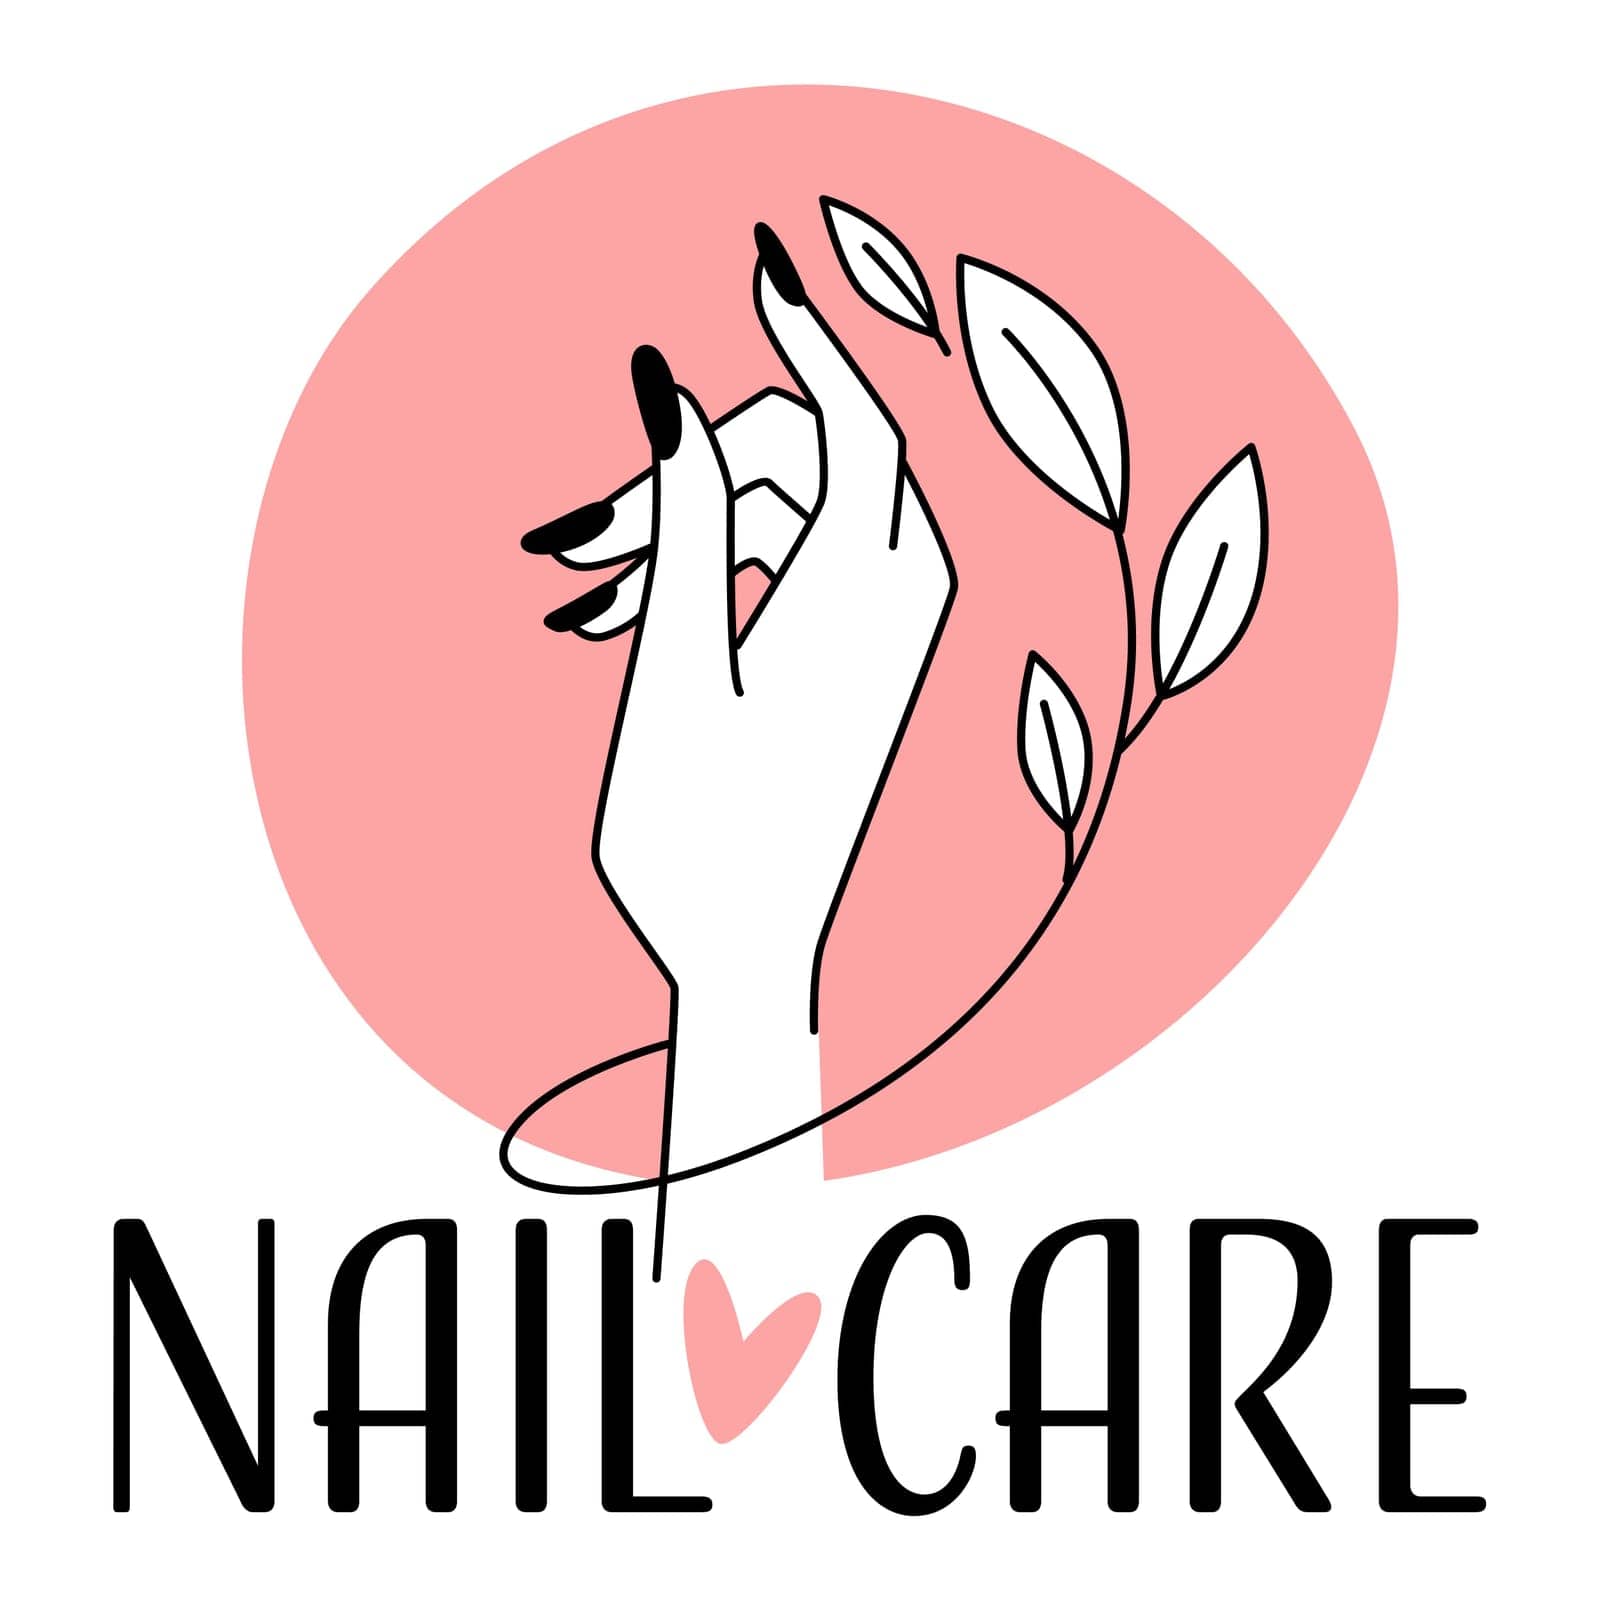 Nail care and treatment, logotype for manicure by Sonulkaster